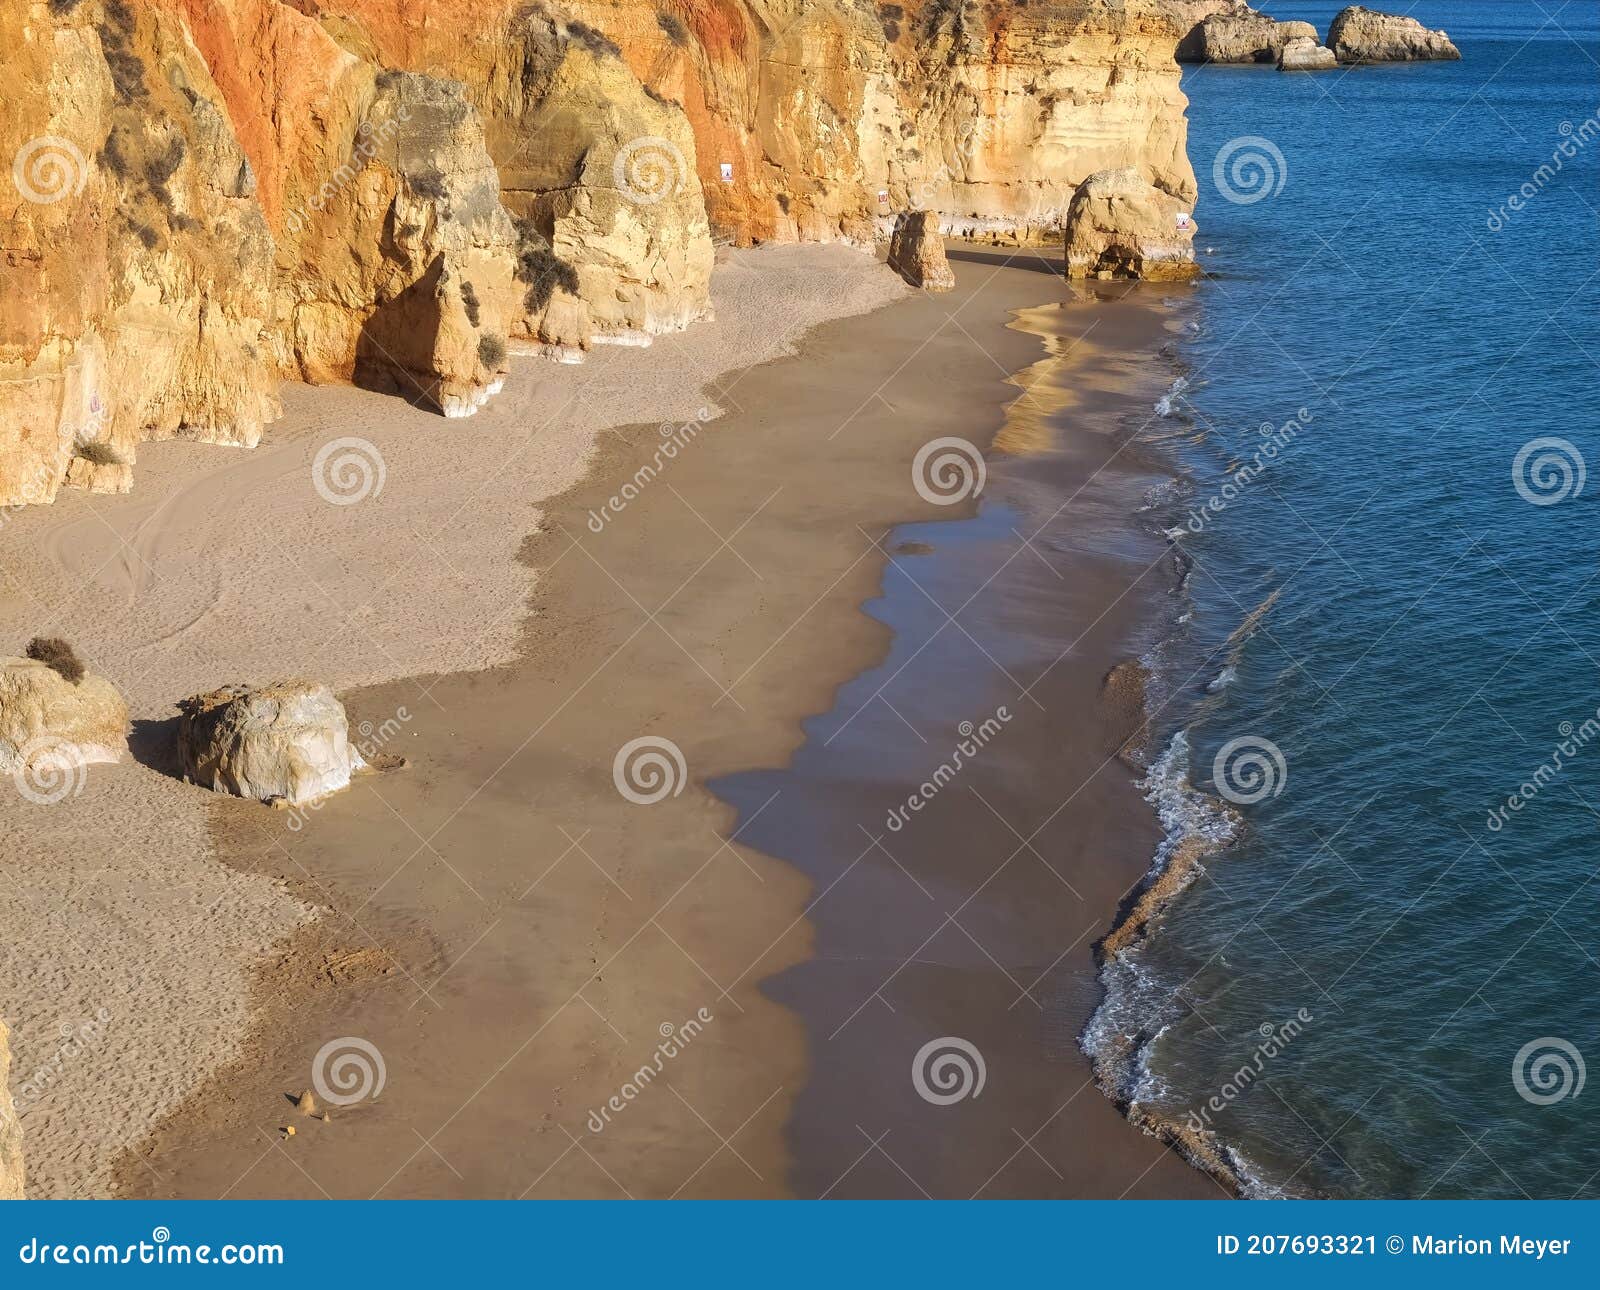 aerial view of praia alemao in portimao at the algarve coast of portugal